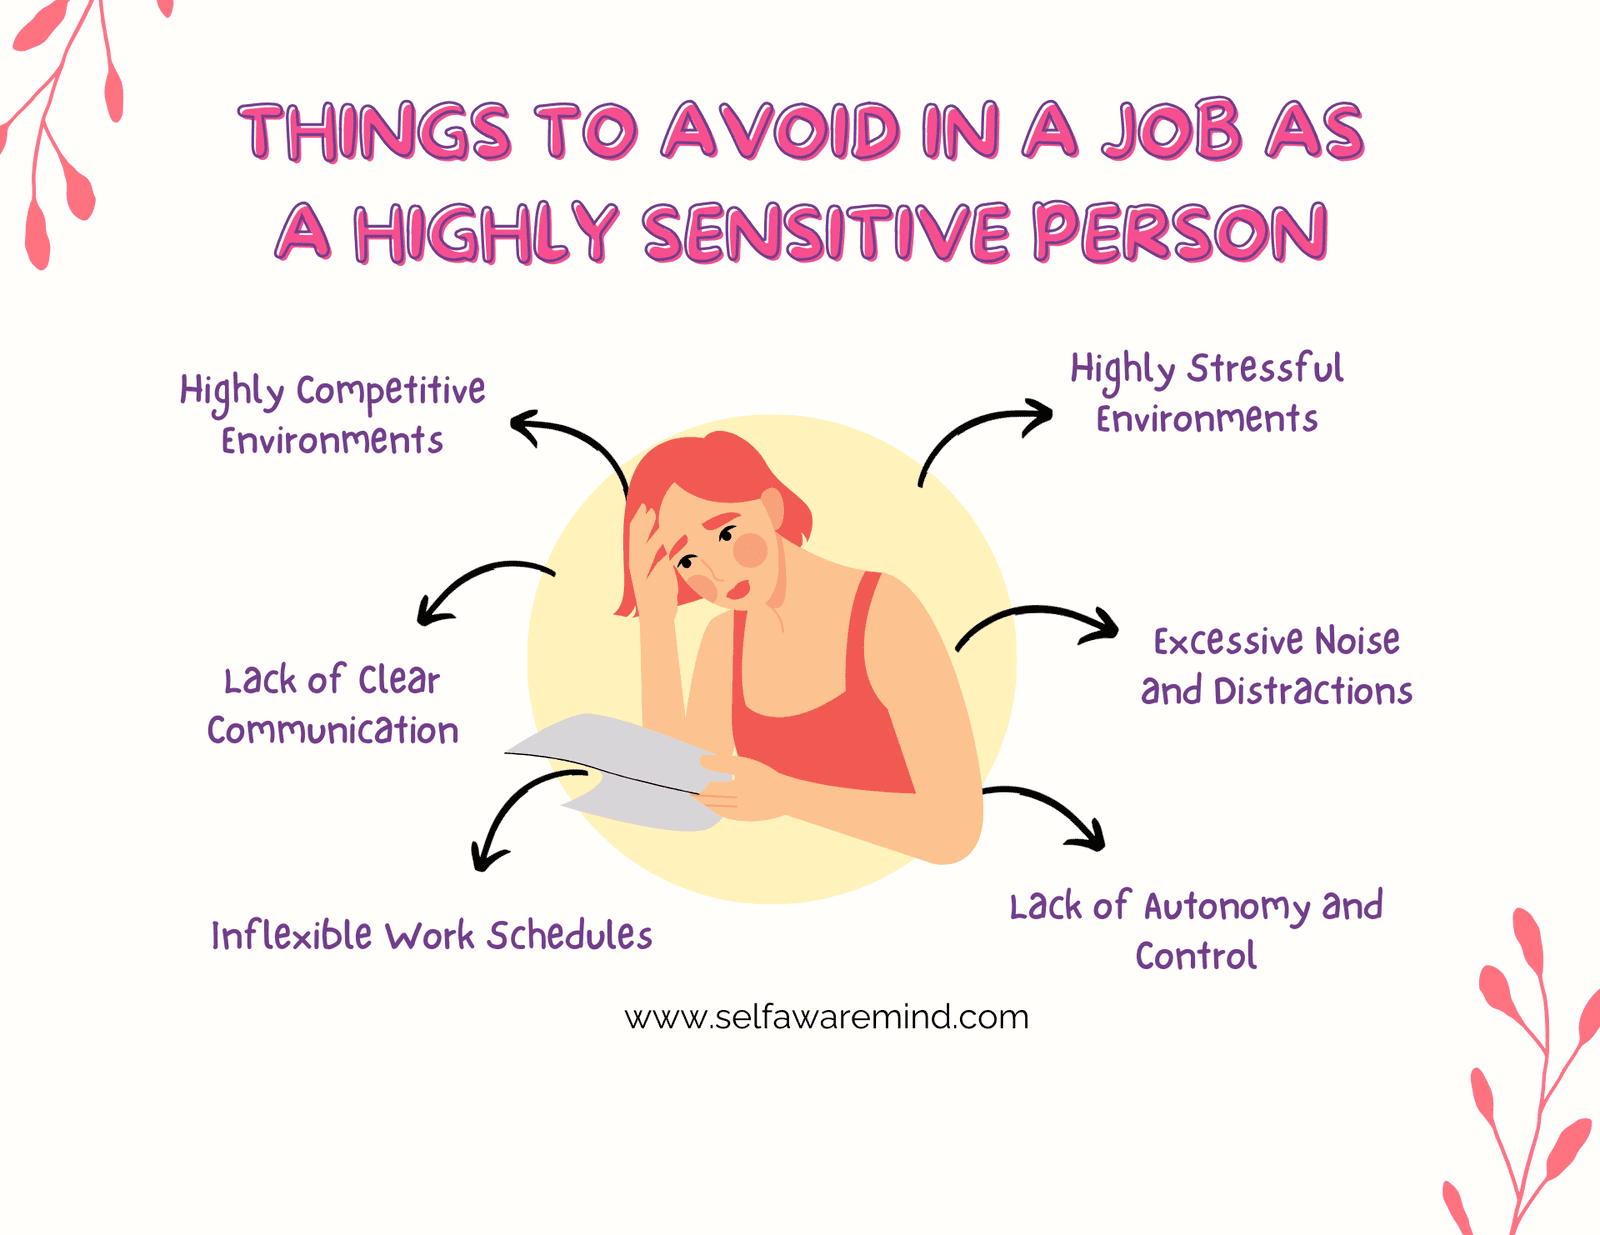 Things to avoid in a job as a highly sensitive person